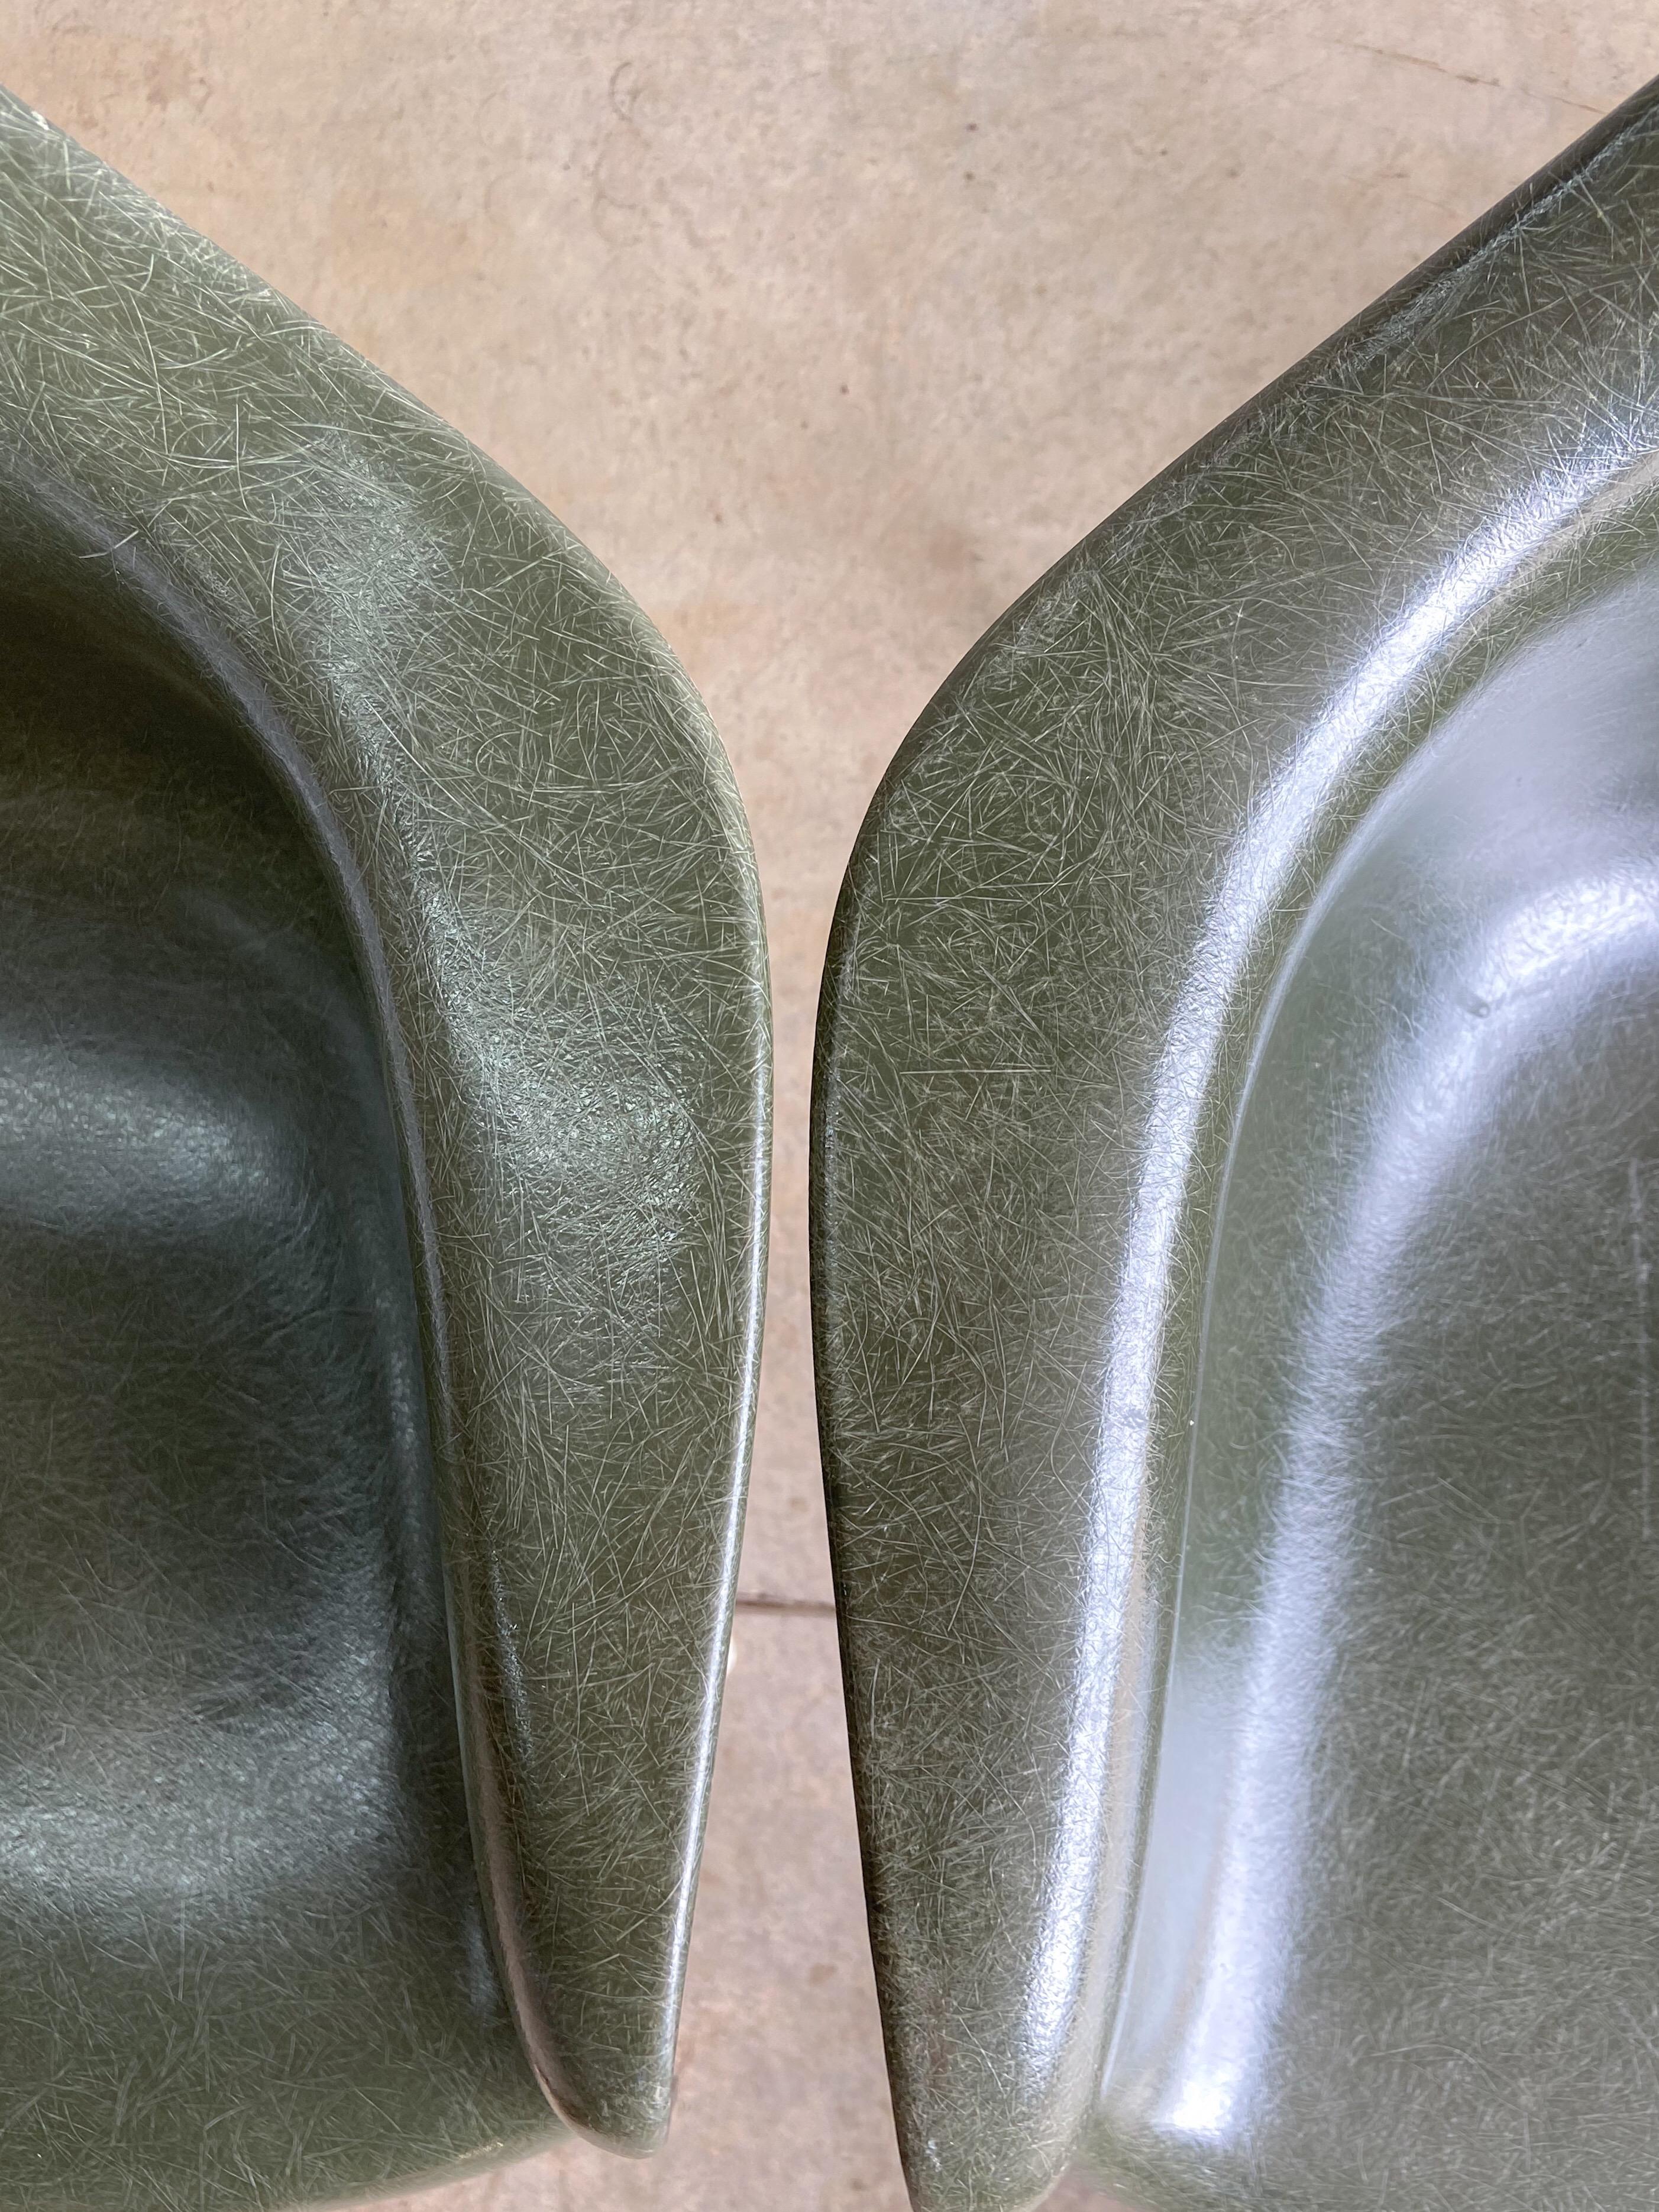 Mid-Century Modern Herman Miller Fiberglass Chairs, Charles and Ray Eames, Olive Green, 1960's For Sale